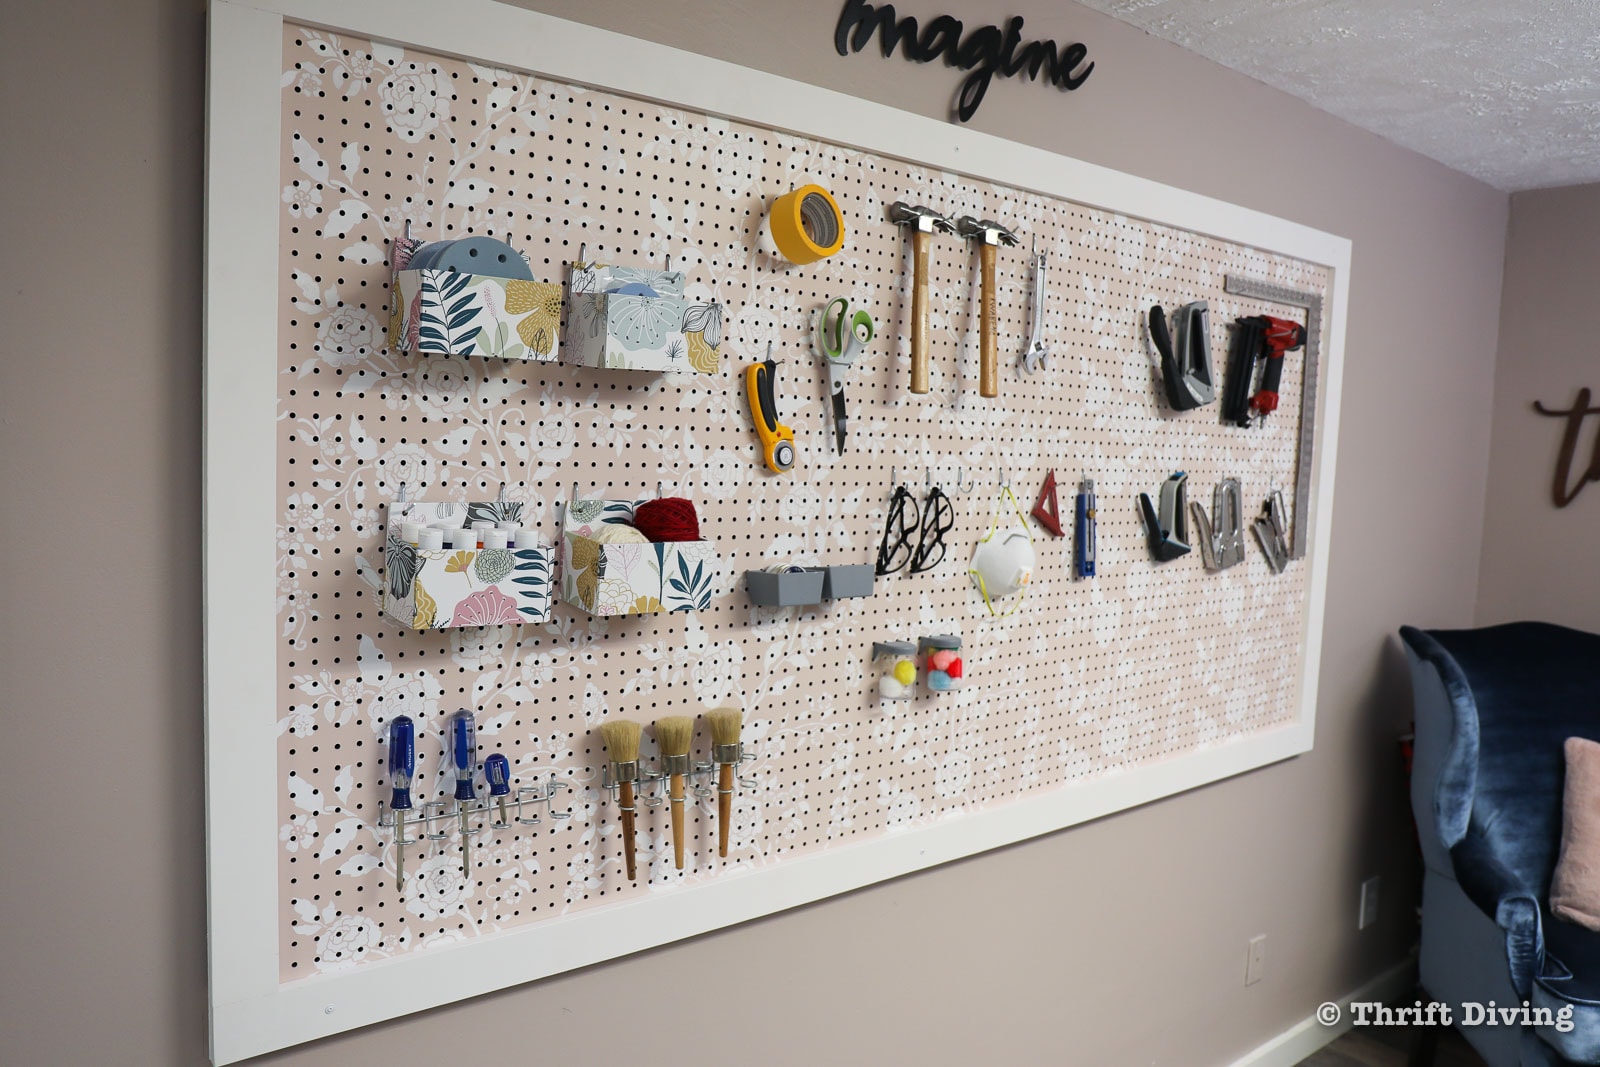 10 Steps to Make a Large Framed Pegboard with Stencils and Organizers